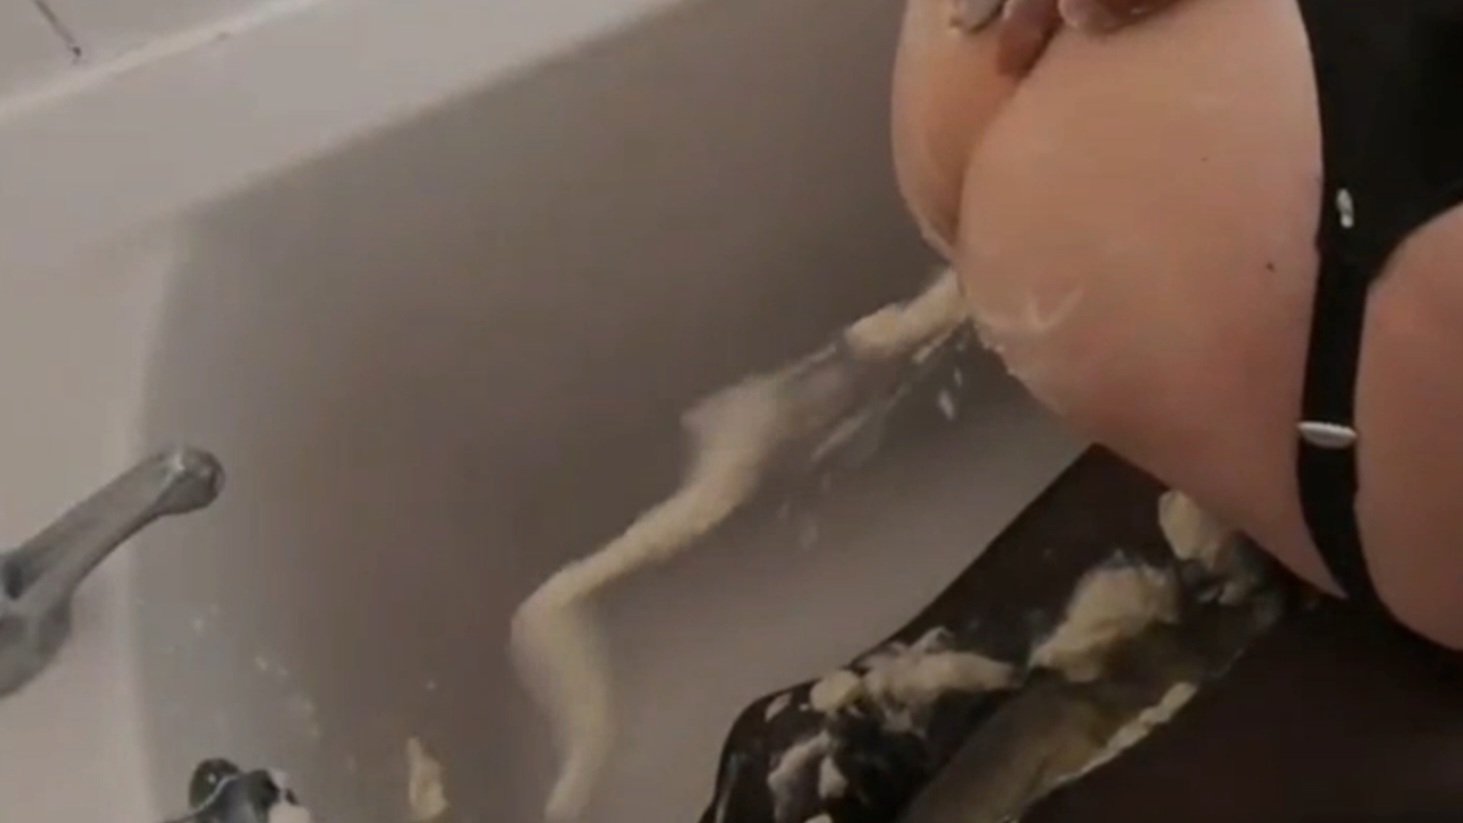 Anal Cream Squirting